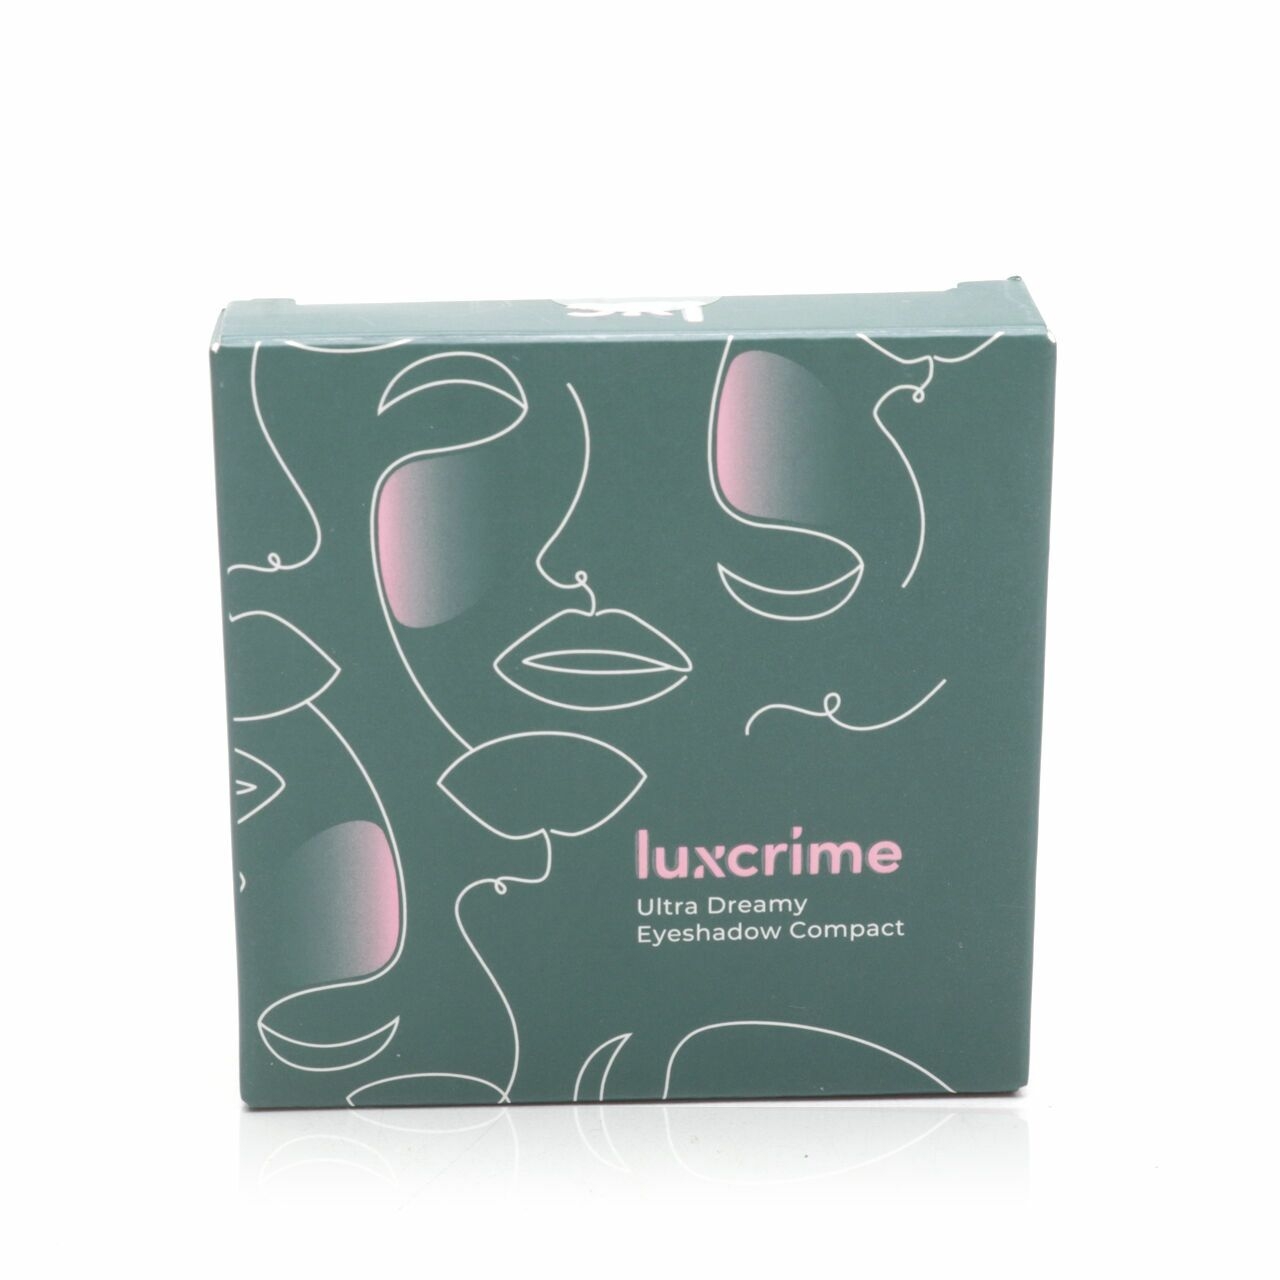 Luxcrime Ultra Dreamy Eyeshadow Compact - Almond Biscotti Sets and Palette